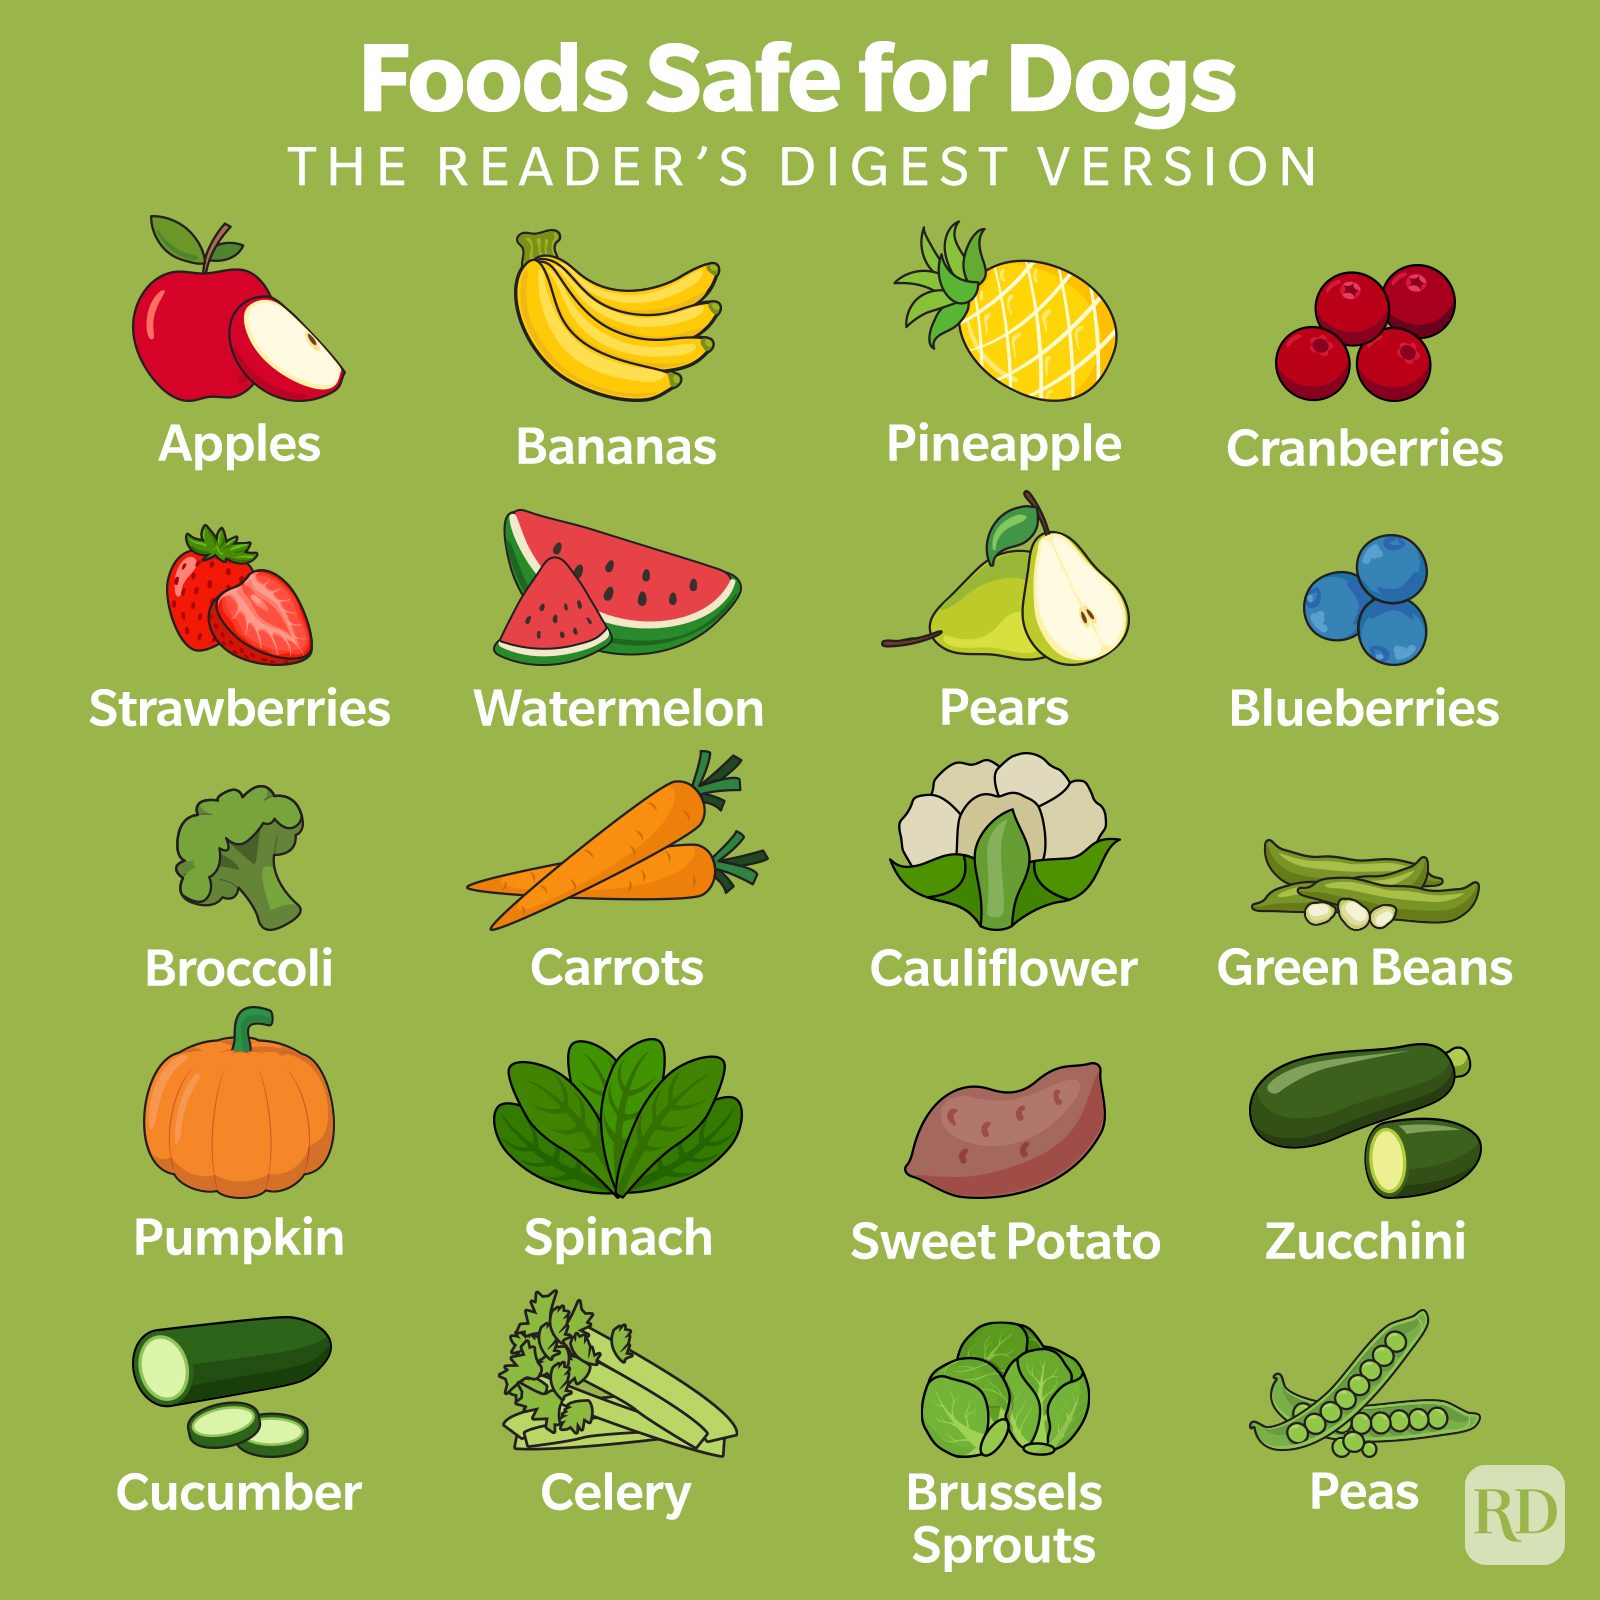 https://www.rd.com/wp-content/uploads/2021/03/20230821_What-Human-Foods-Can-Dogs-Eat-35-Foods-Fido-Can-Eat-Too_Infographic.jpg?fit=700%2C700